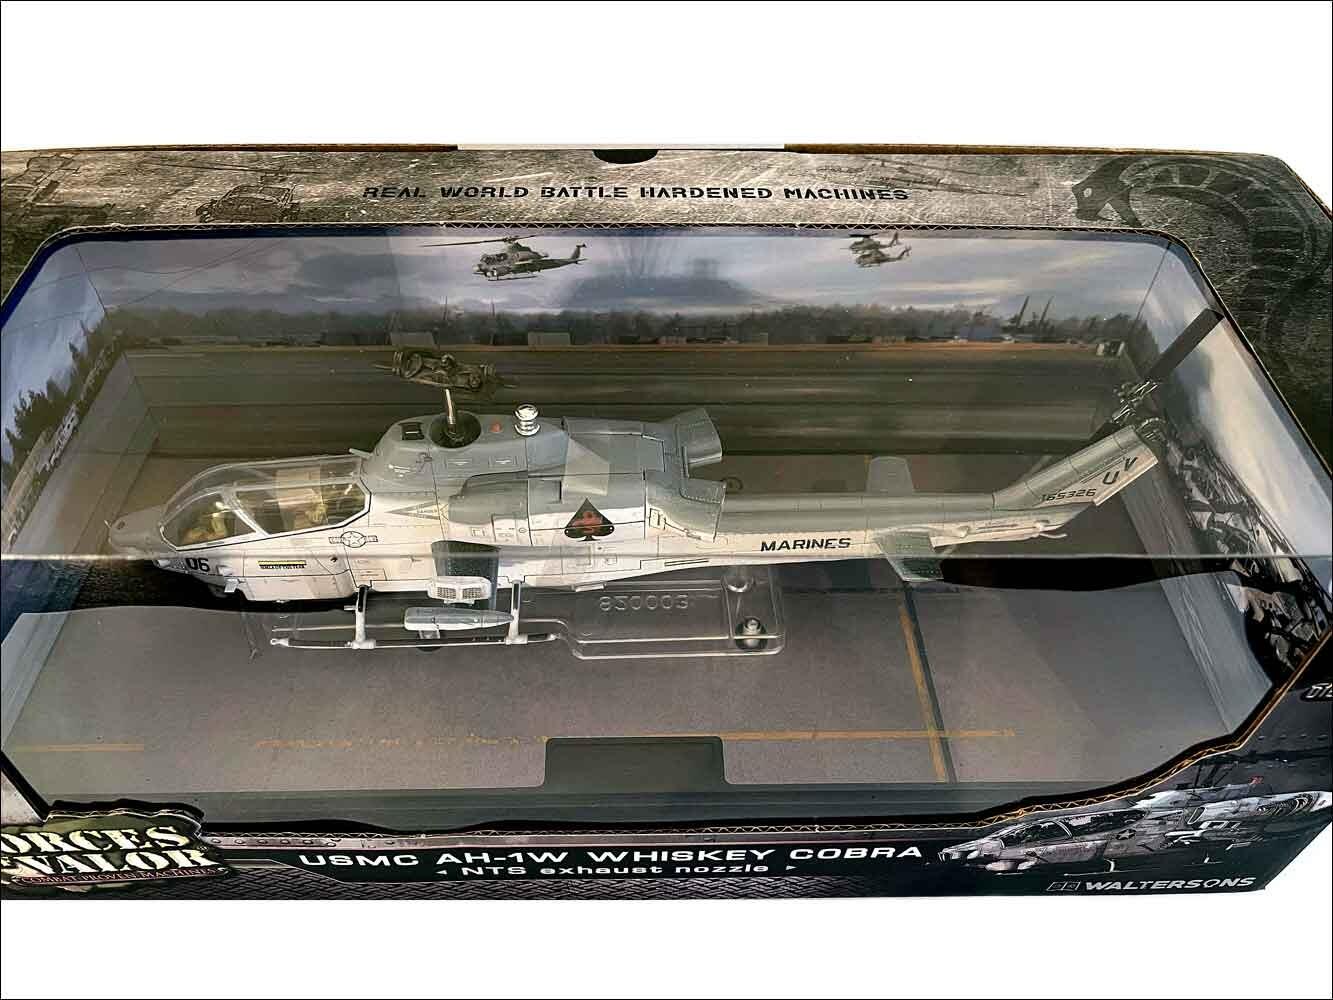 U.S.Marine Corps helicopter diecast model